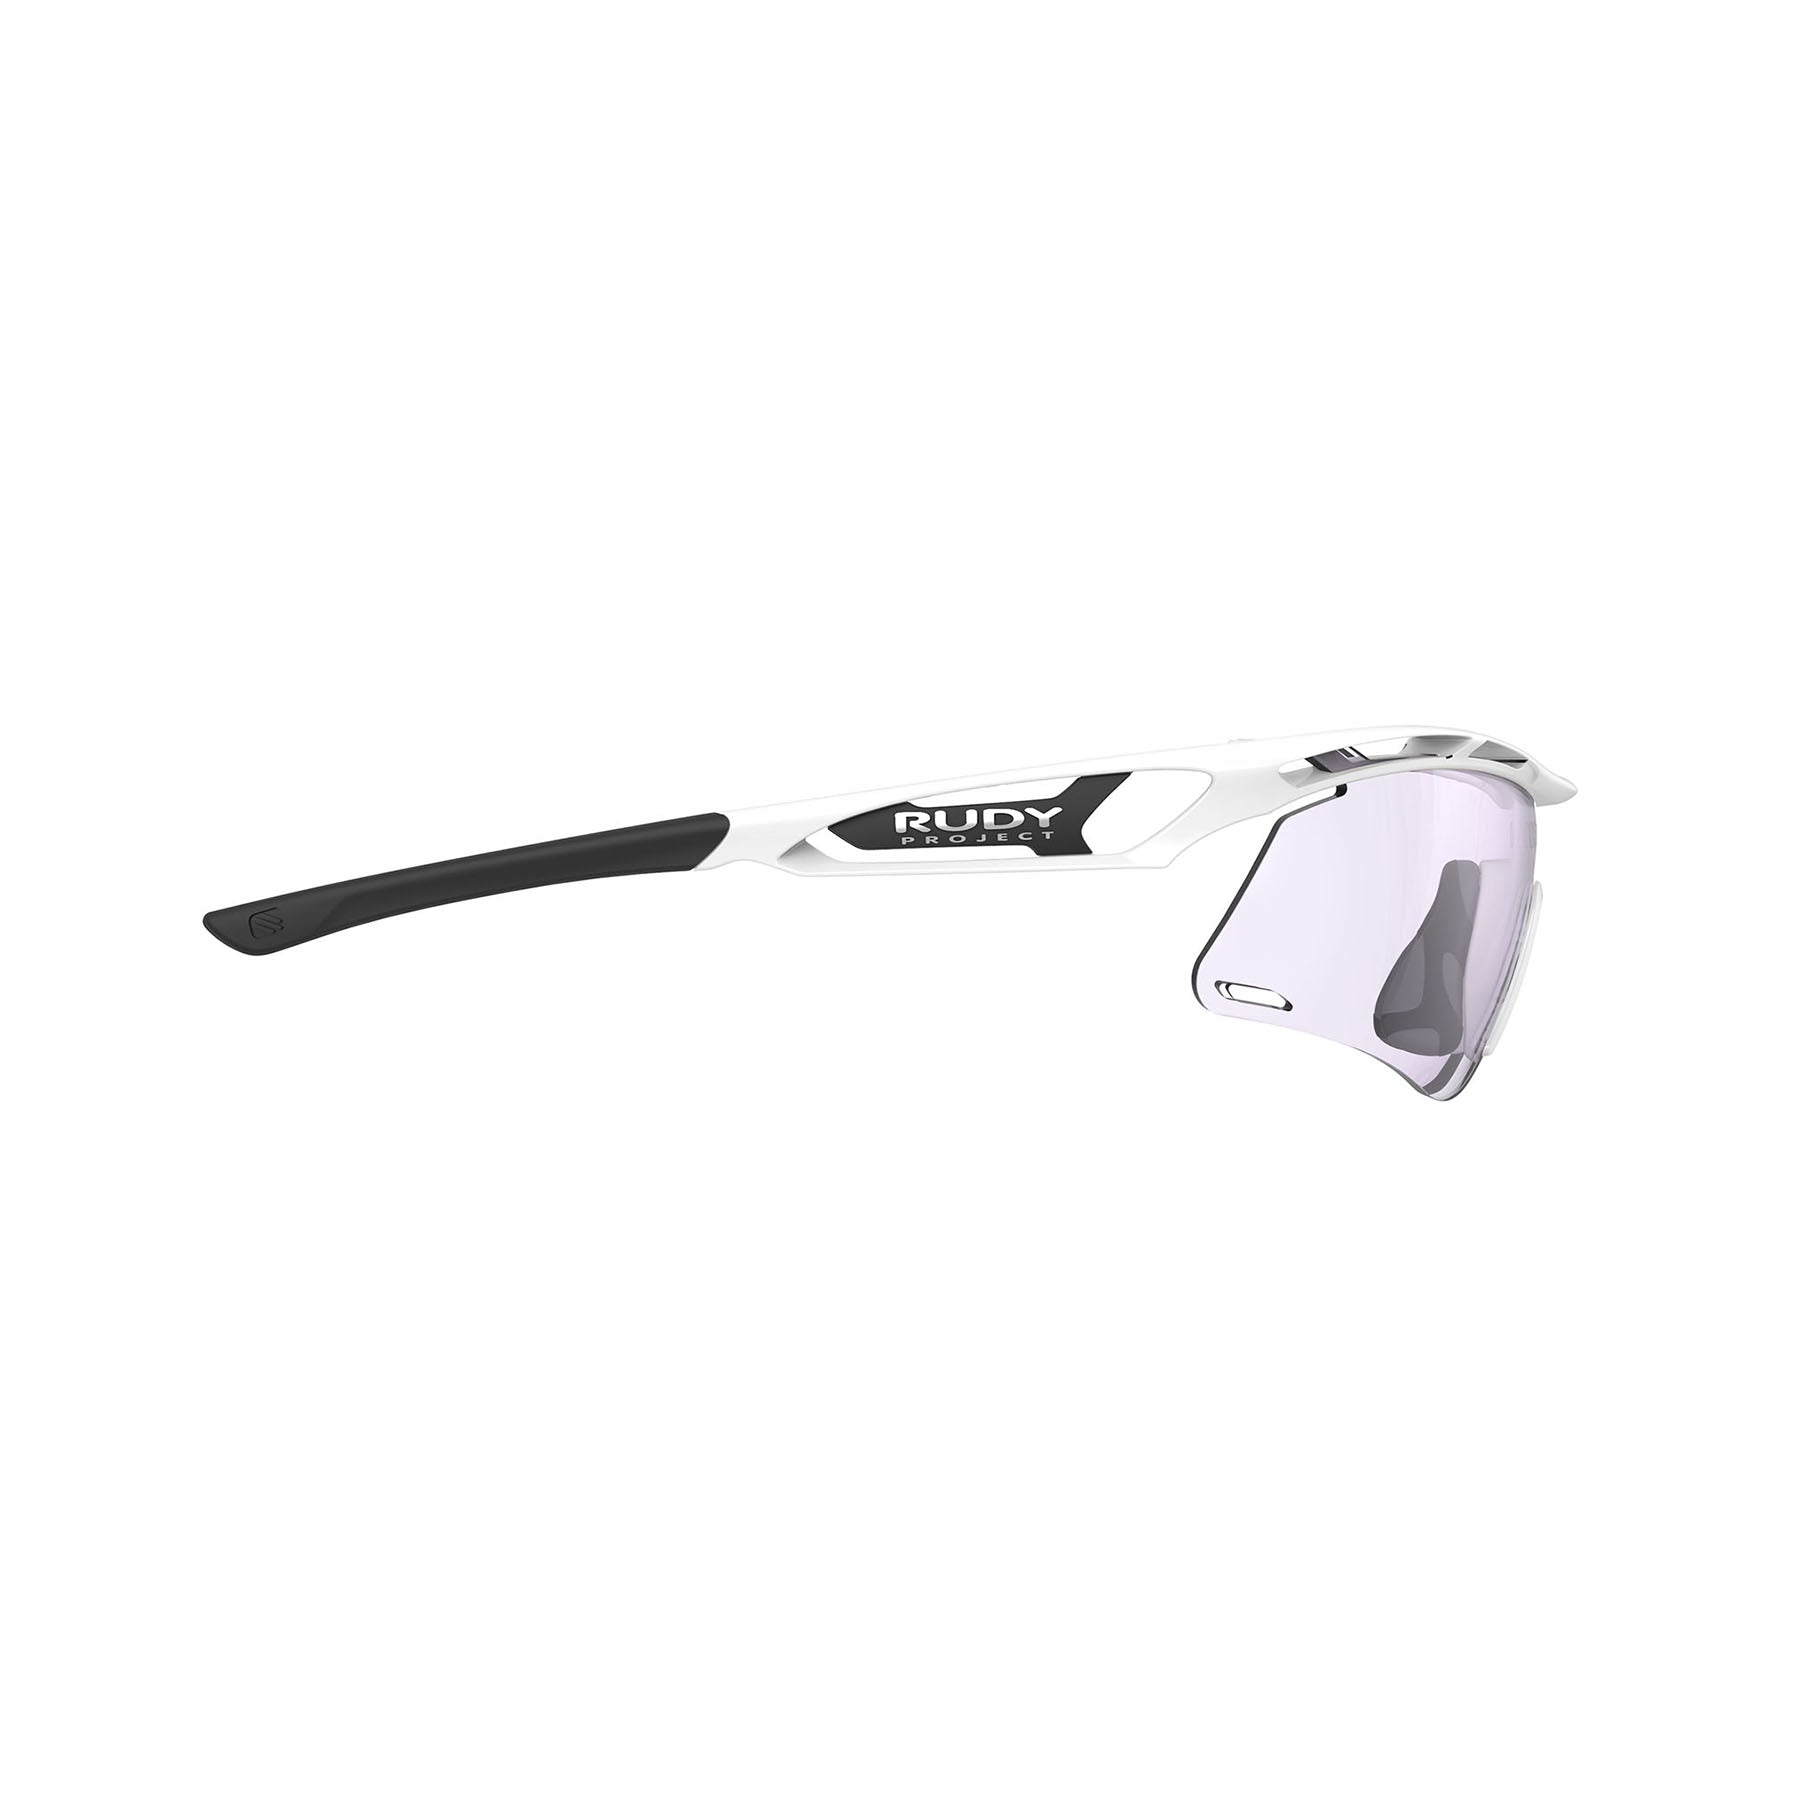 Rudy Project Tralyx running and cycling sport shield prescription sunglasses#color_tralyx-plus-slim-white-gloss-frame-with-impactx-photochromic-2-laser-purple-lenses